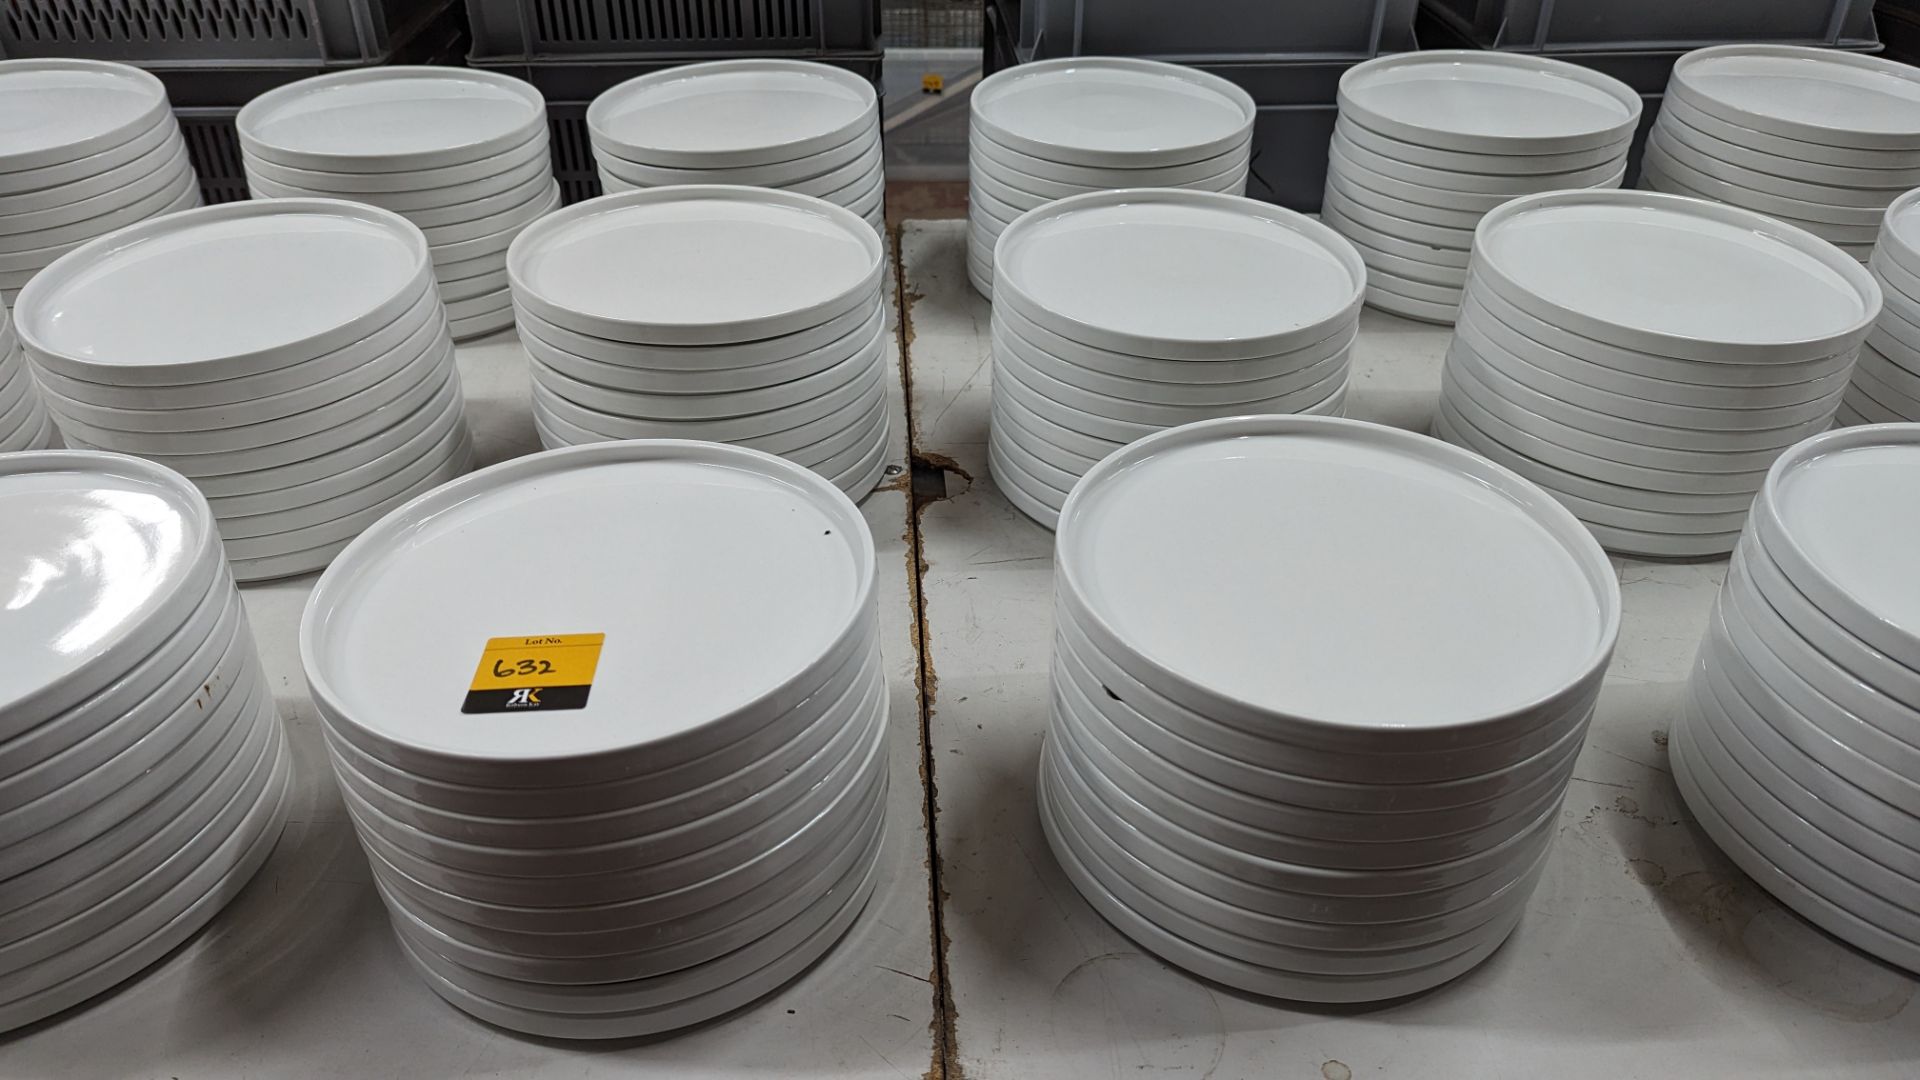 60 off Genware 245mm round flat plates with upright rim to the outer edge